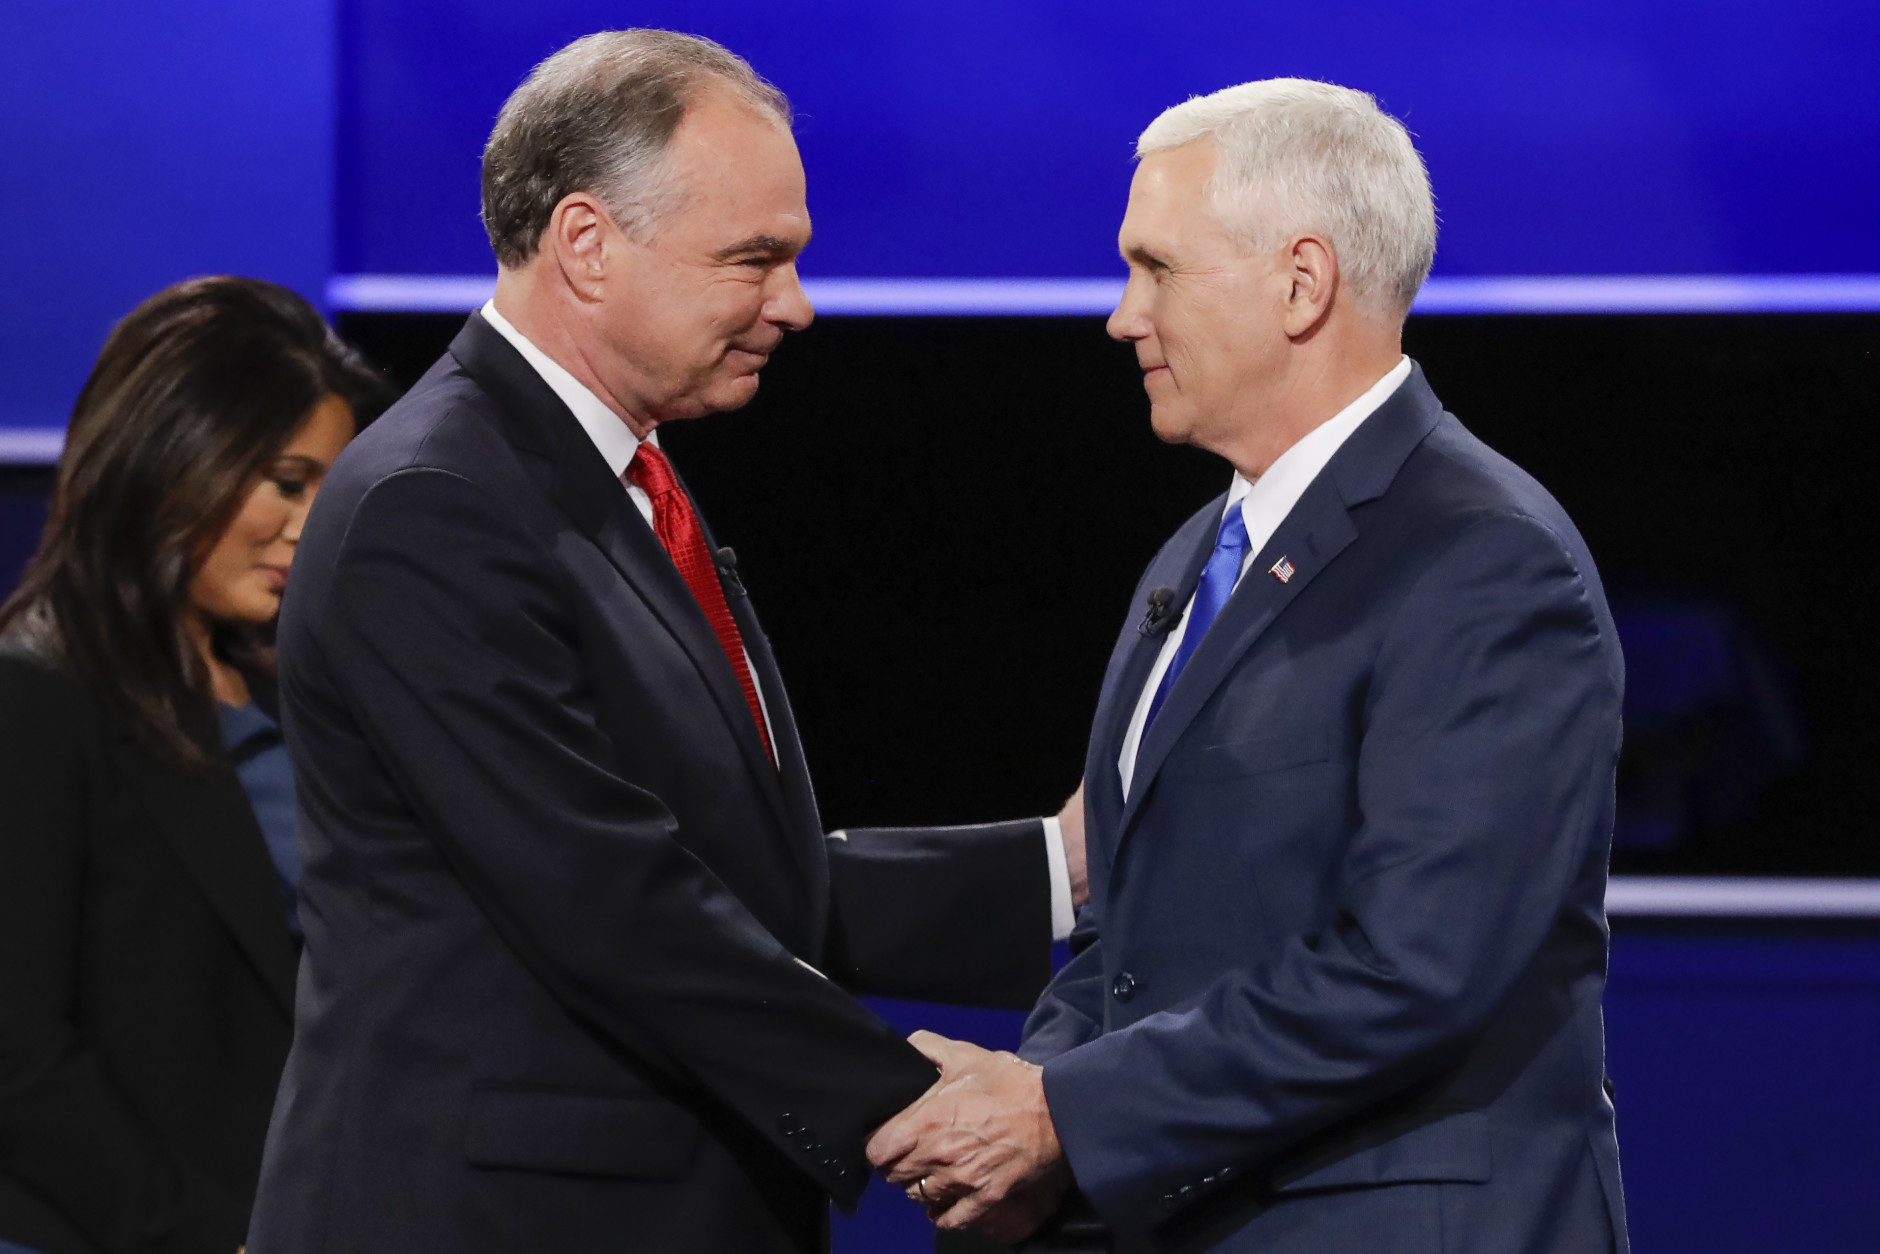 Republican vice-presidential nominee Gov. Mike Pence, right, and Democratic vice-presidential nominee Sen. Tim Kaine shake hands during the vice-presidential debate at Longwood University in Farmville, Va., Tuesday, Oct. 4, 2016. (AP Photo/David Goldman)